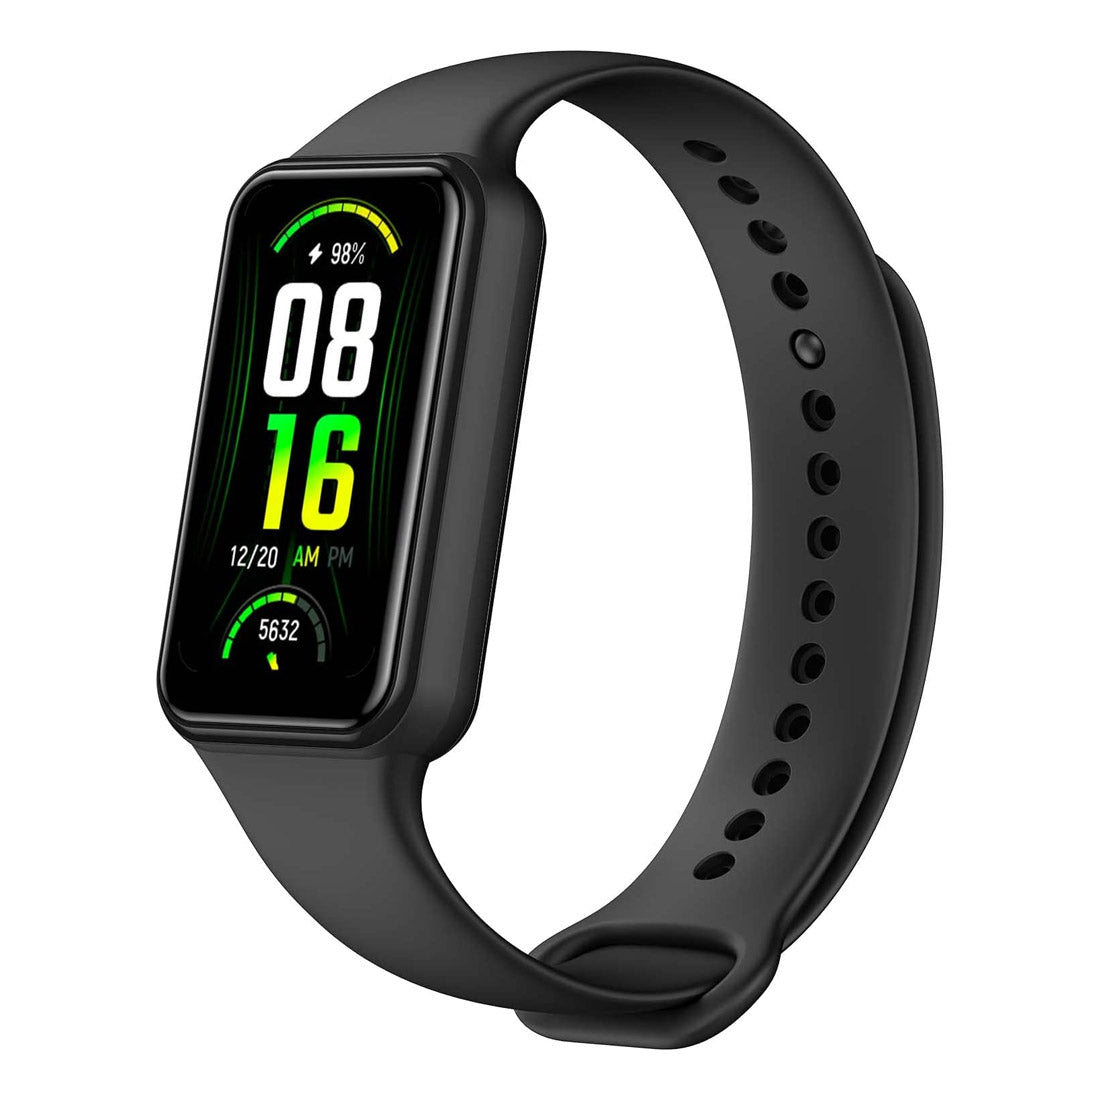 Exclusive: This is the upcoming Amazfit Band 7 -  news